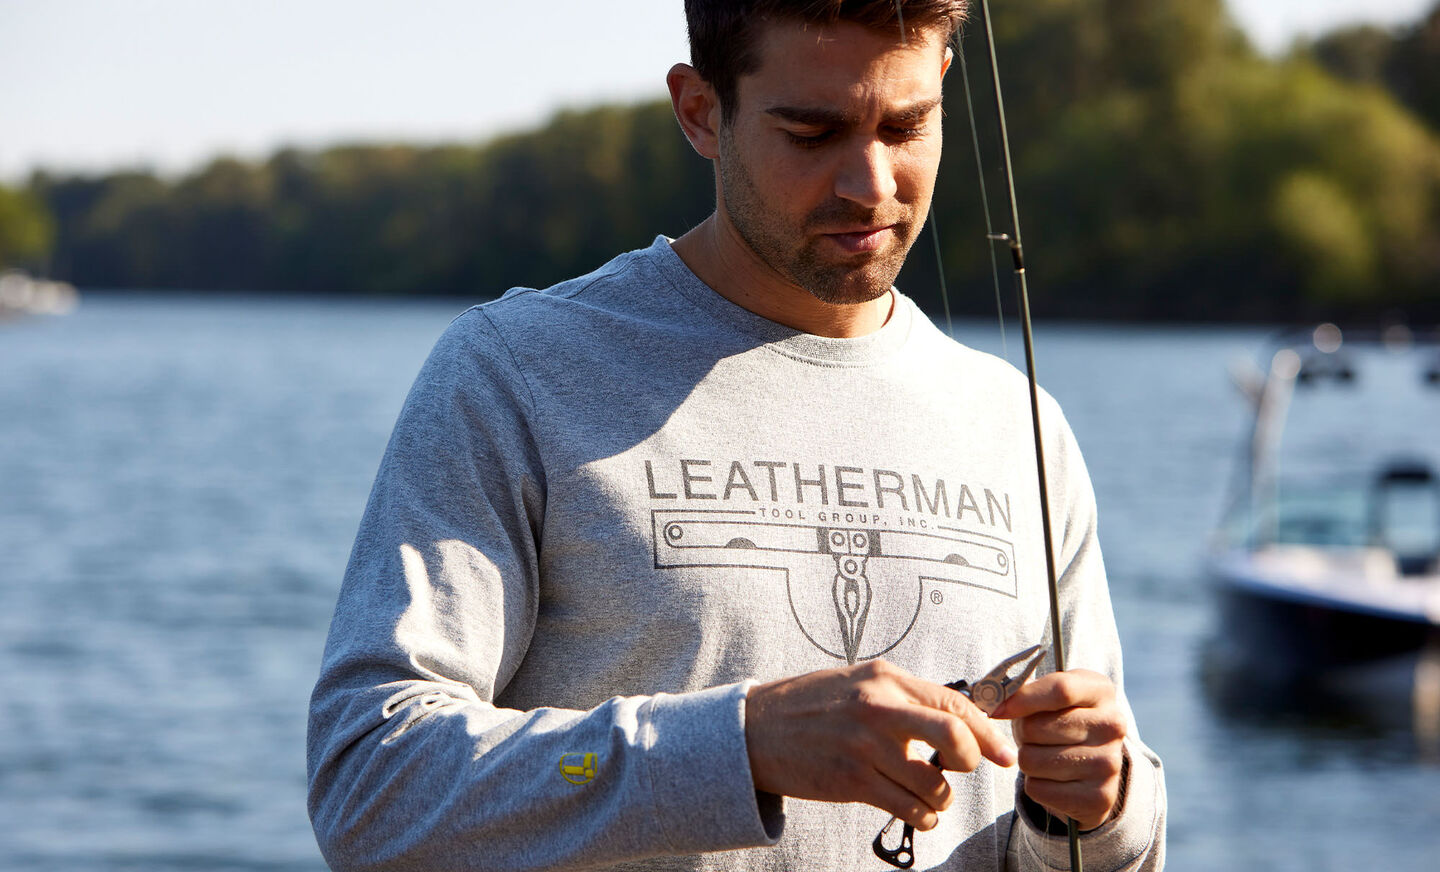 Man wearing gray Leatherman long sleeve logo t shirt by river using Leatherman tool to cut fishing line from rod